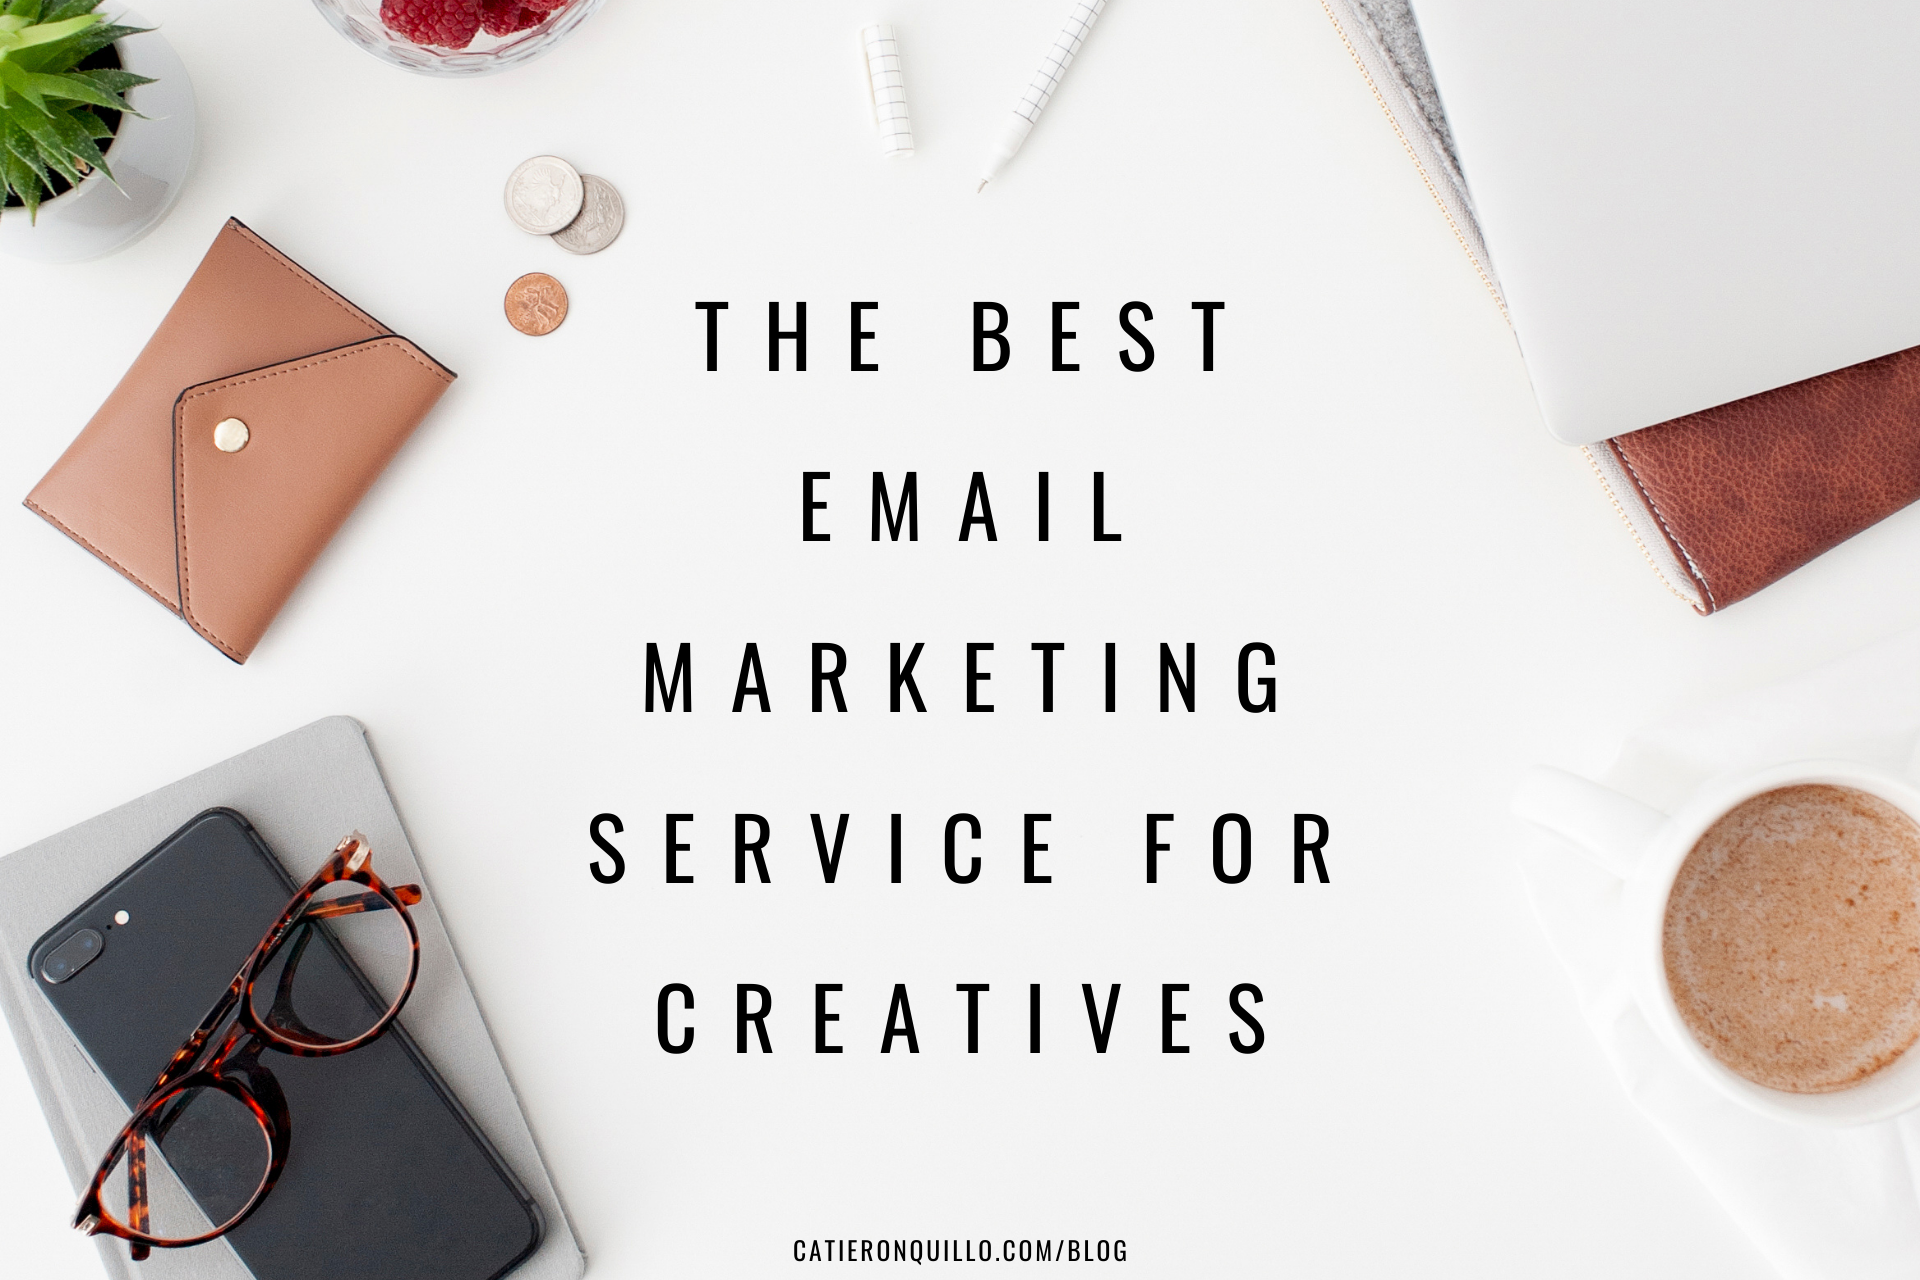 THE BEST EMAIL MARKETING SERVICE FOR CREATIVES FLODESK